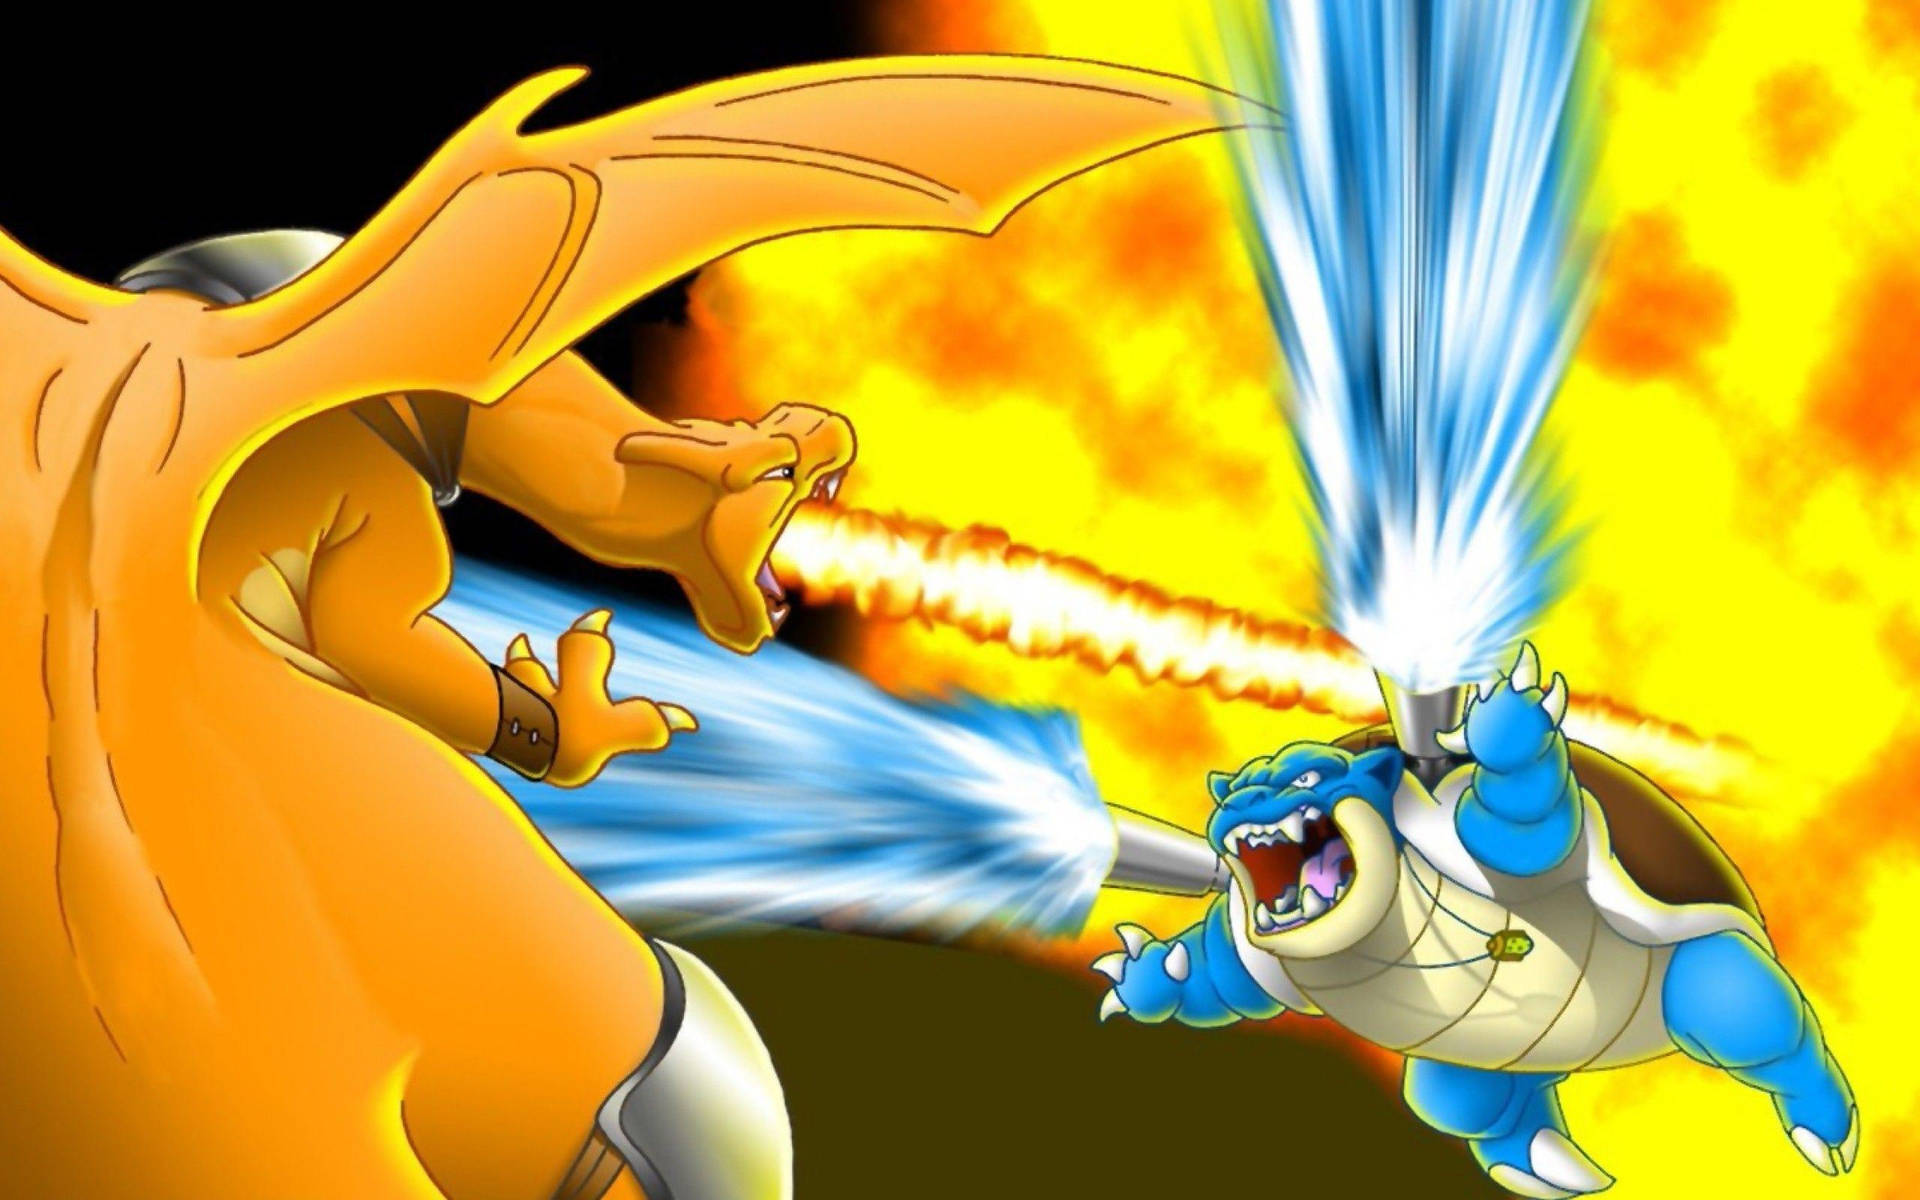 Two Generations Of Fire And Water – Blastoise And Charizard